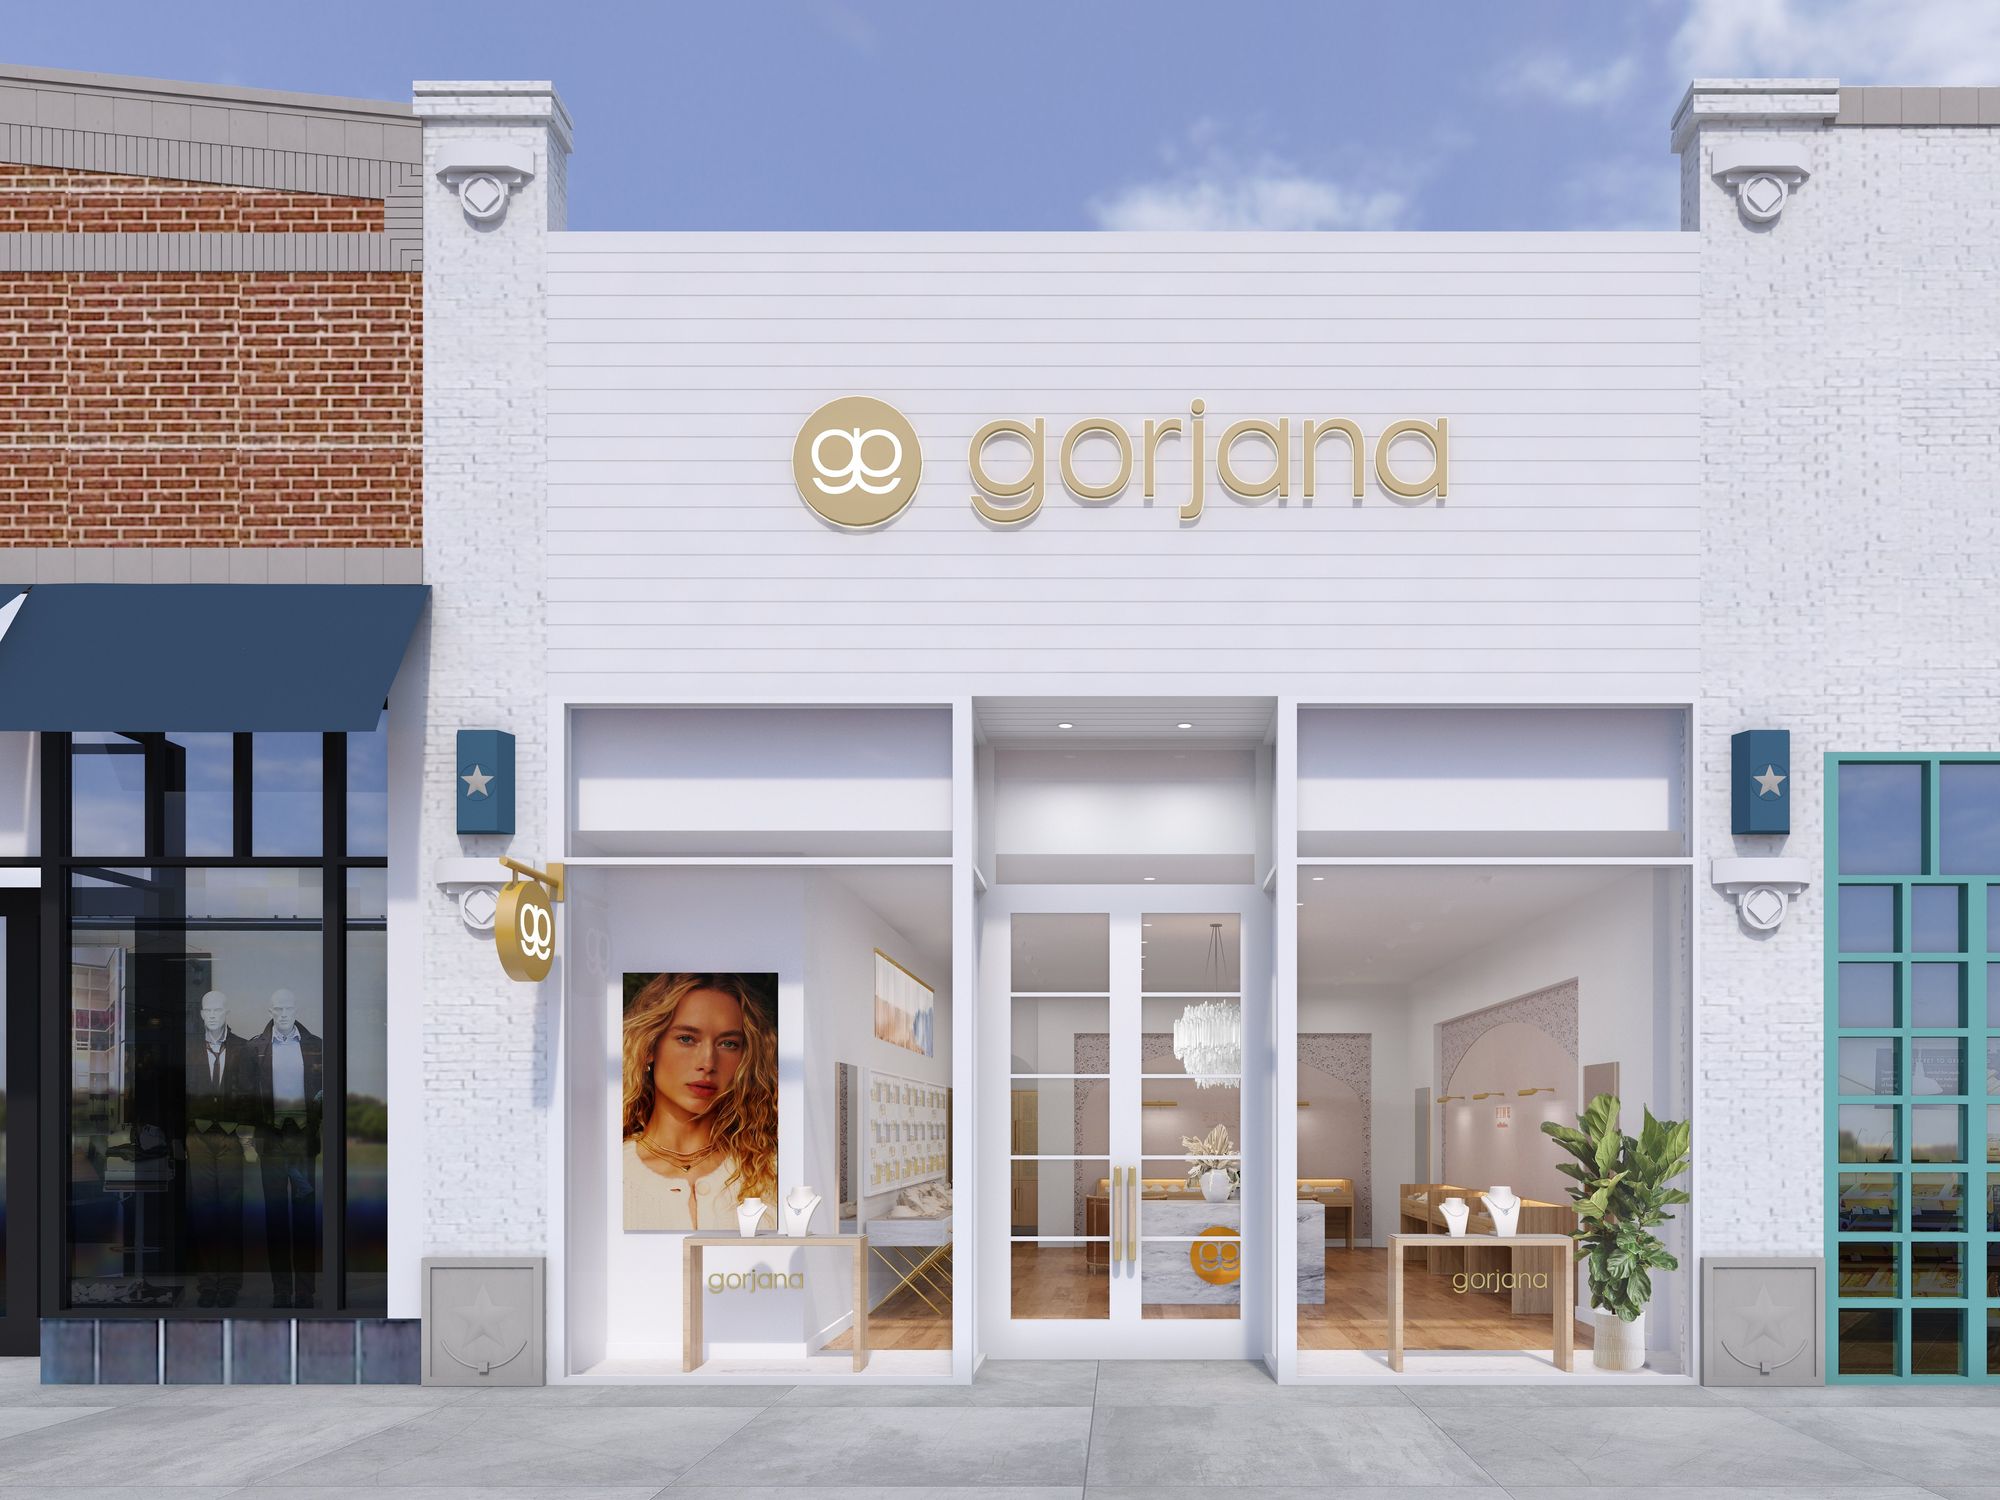 California jeweler rides a wave into Dallas-Fort Worth with 2 new stores -  CultureMap Dallas